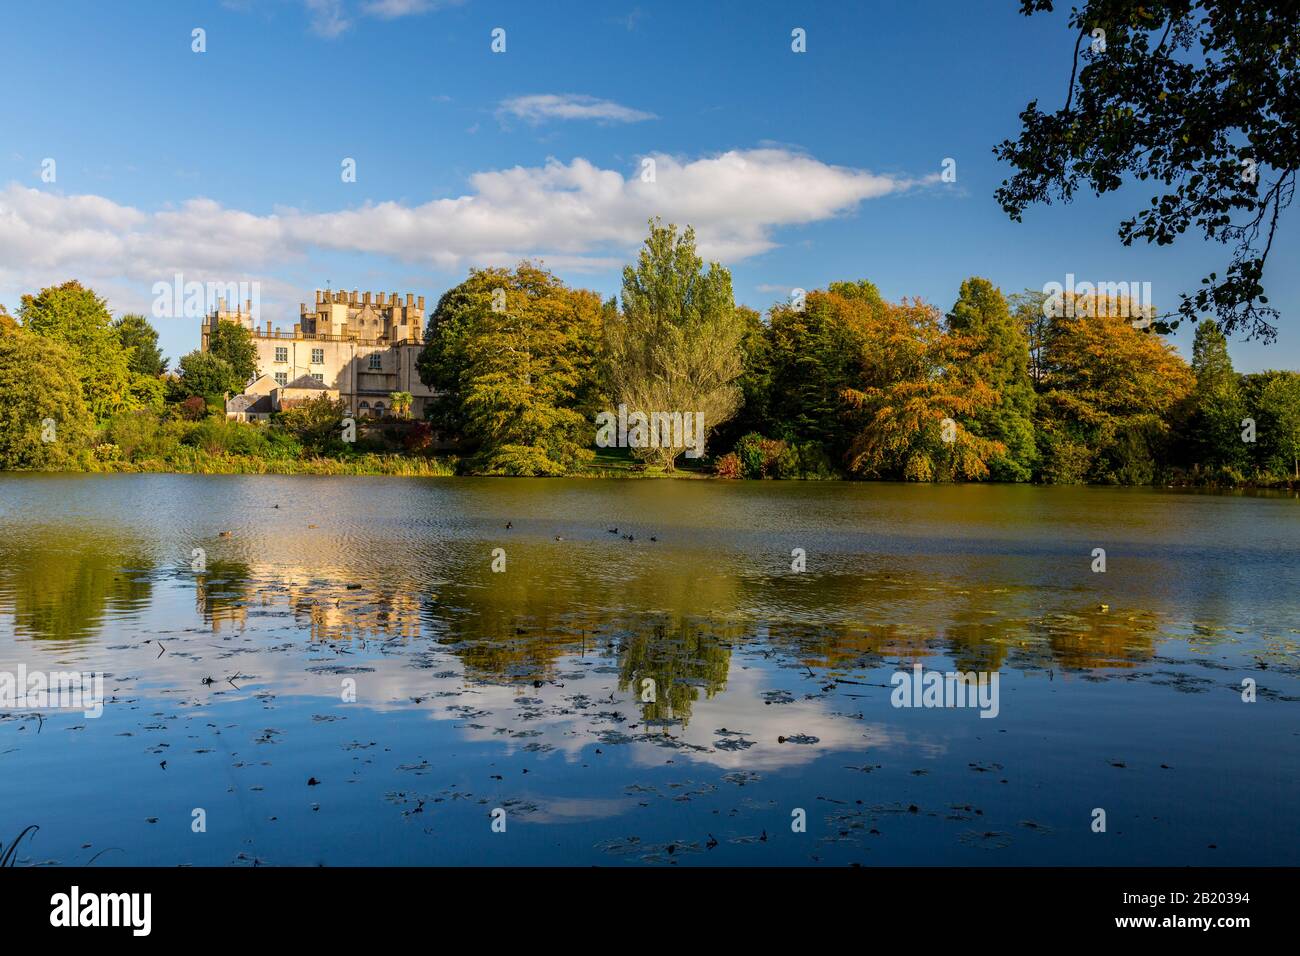 Sherborne 'New' Castle built 1594 by Sir Walter Raleigh viewed across the artificial lake designed by Capability Brown, Sherborne, Dorset, England, UK Stock Photo